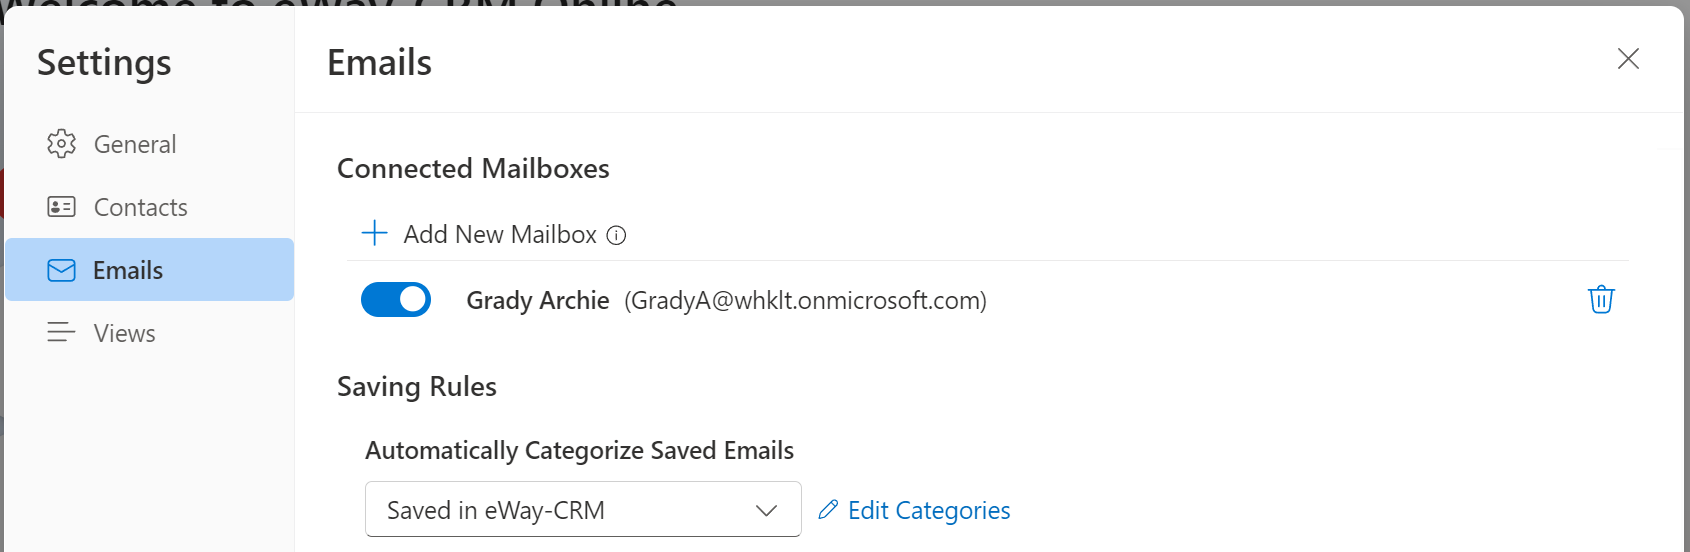 Set Email Tracking for Contacts